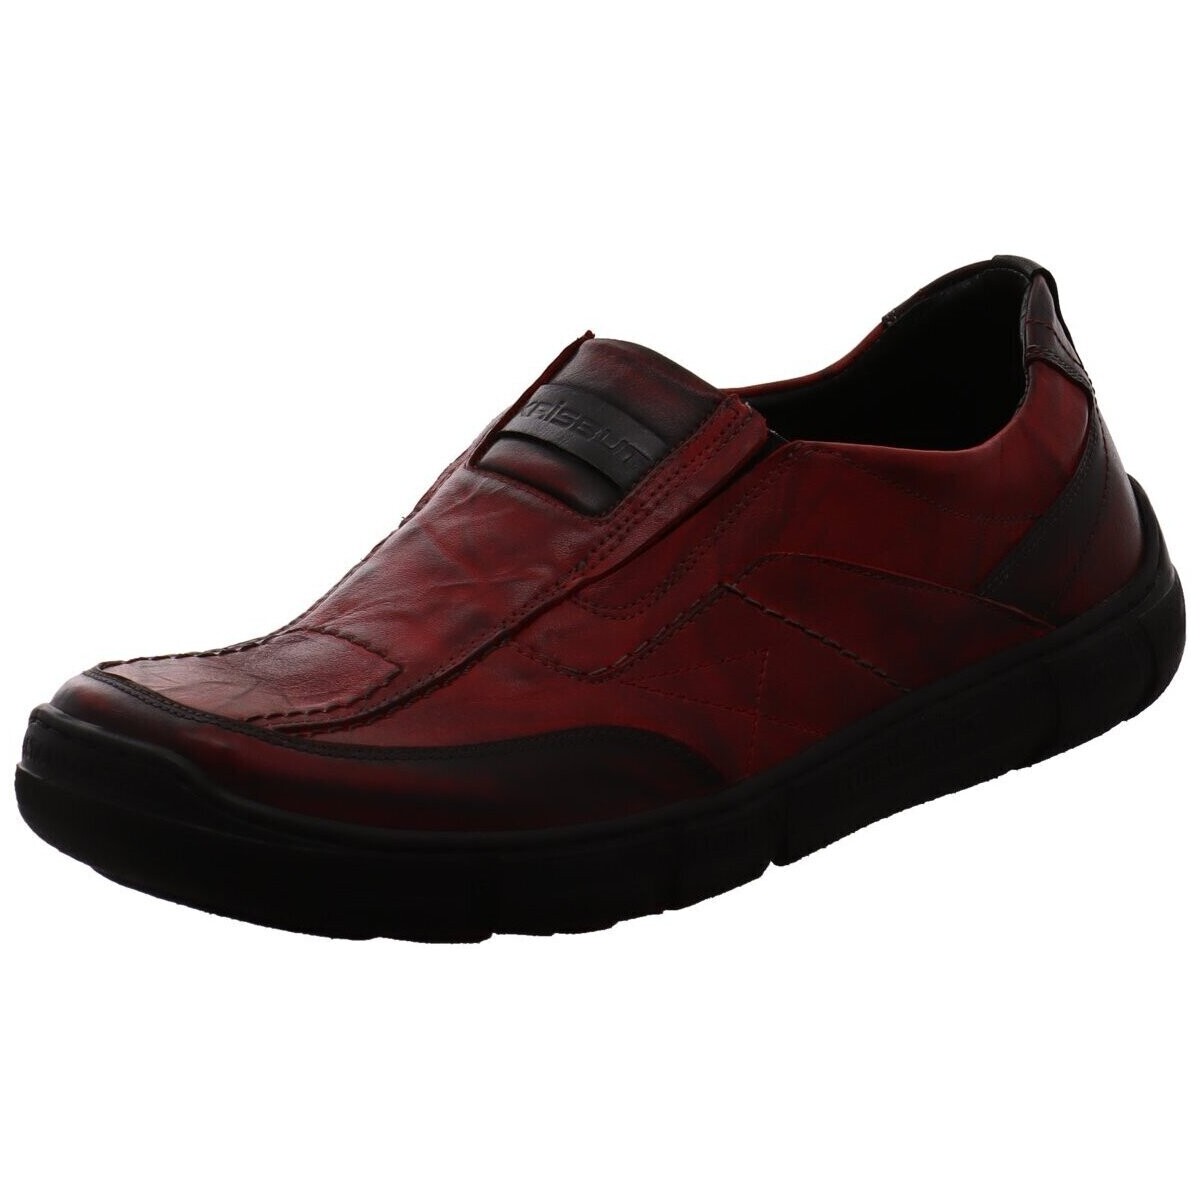 Chaussures Homme Mocassins Krisbut  Rouge